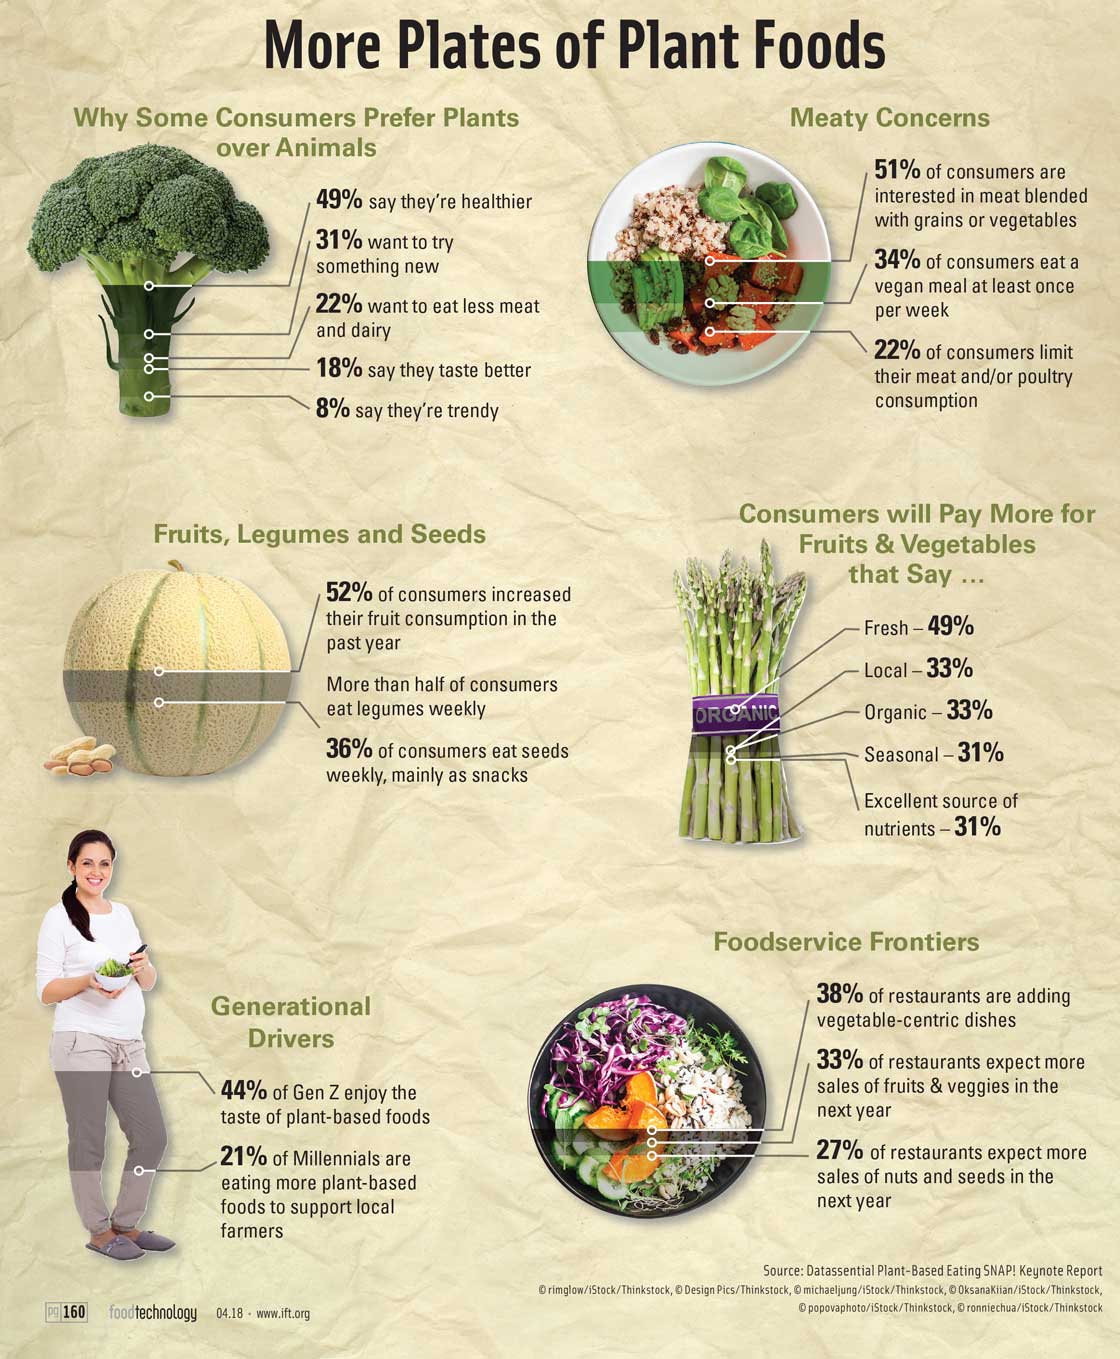 More Plates of Plant Foods. Source: Datassential Plant-Based Eating SNAP! Keynote Report